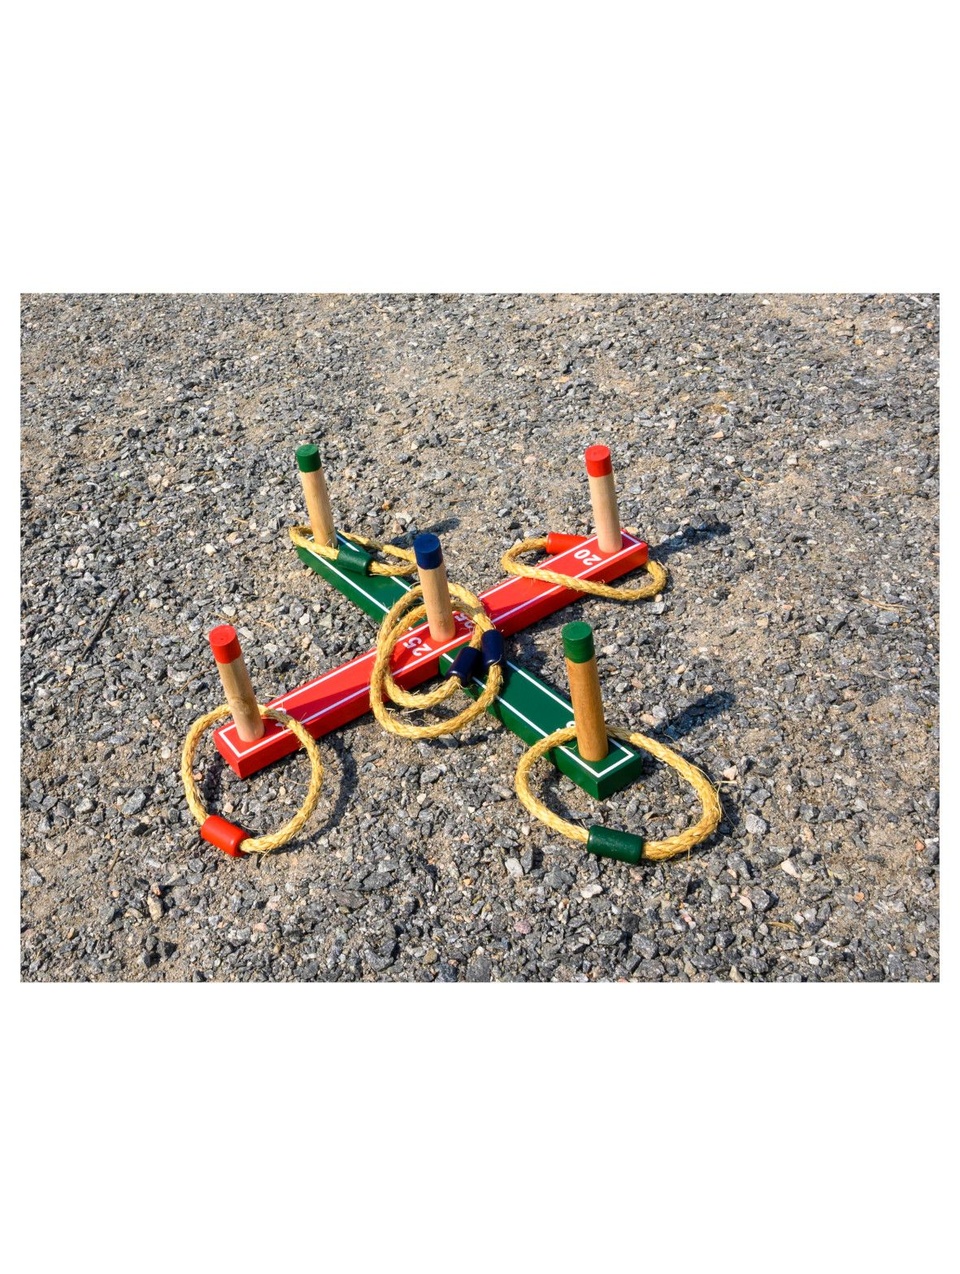 Retr-oh! Retr-Oh Ring Toss Game Set, 4 Piece | CoolSprings Galleria